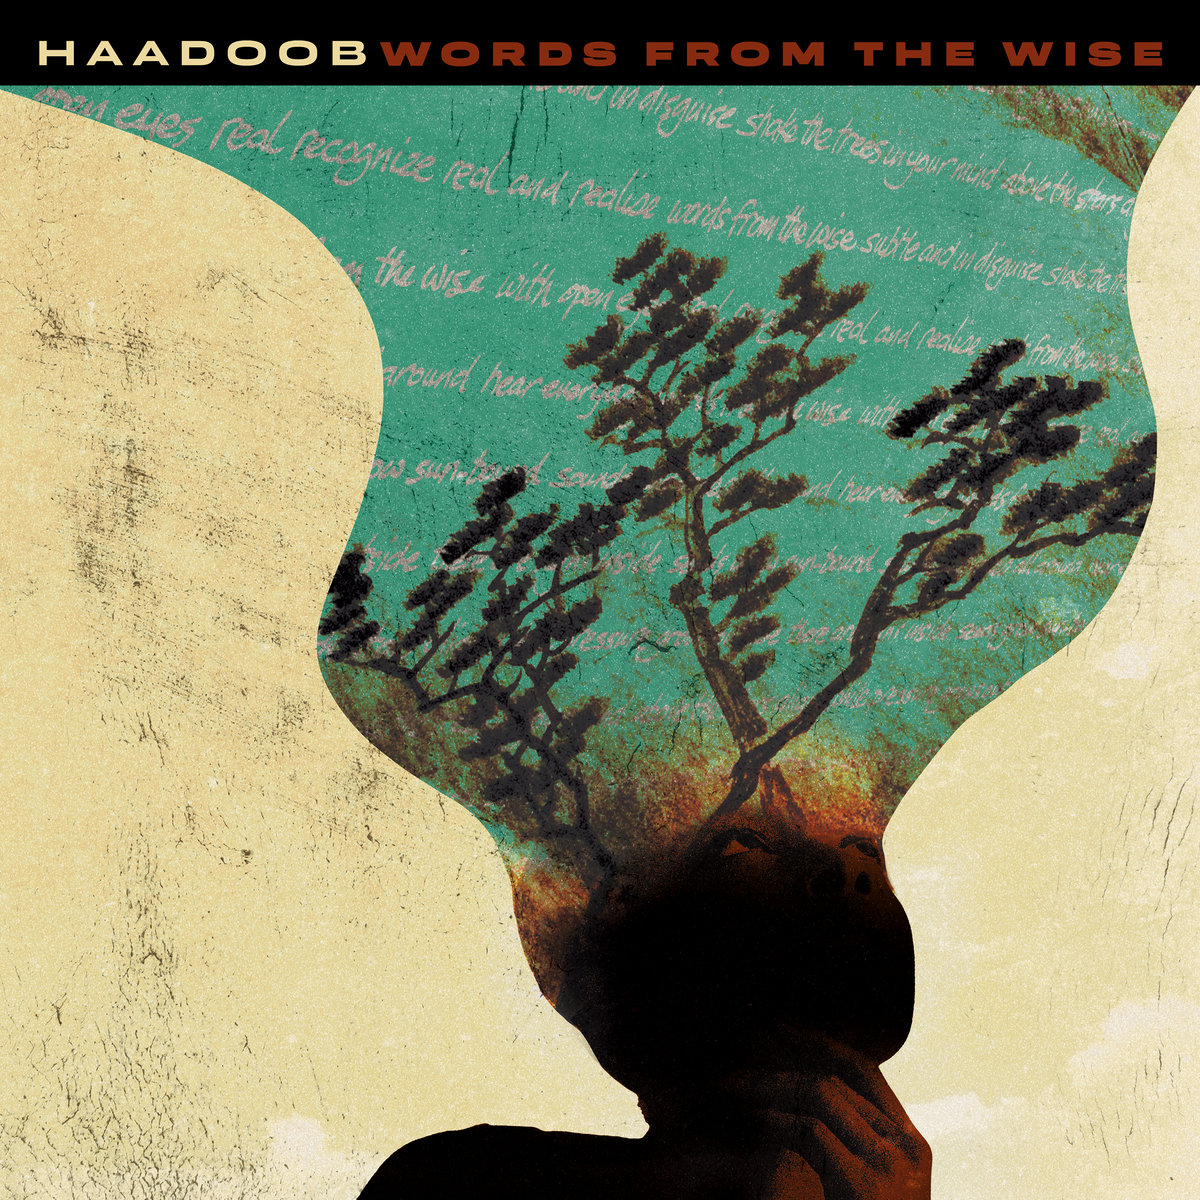 Haadoob___words_from_the_wise